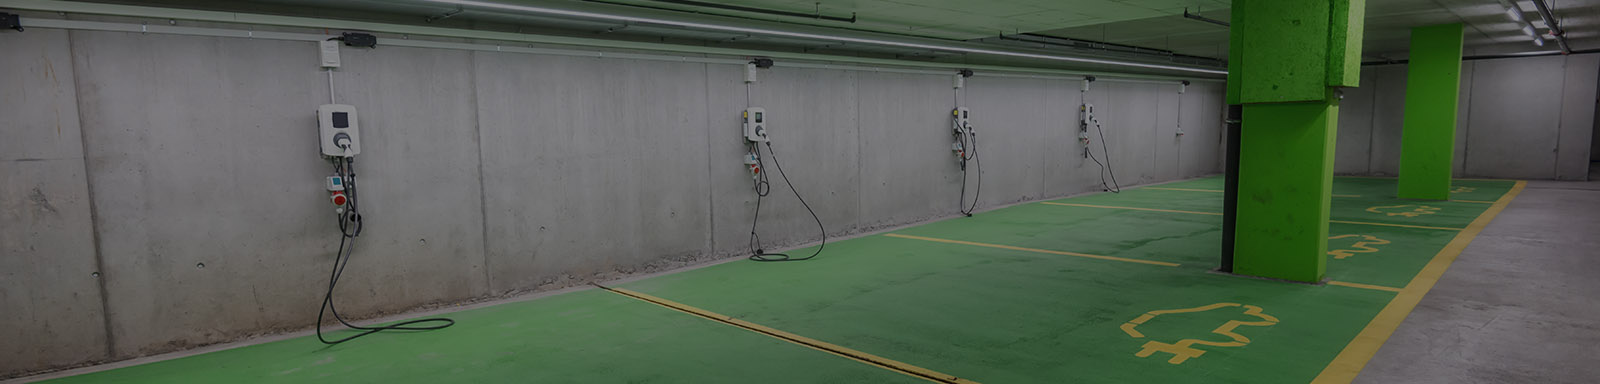 Bright, well-lit parking garage equipped with charging stations for electric cars with green and yellow painted stalls to differentiate them from other parking spaces.